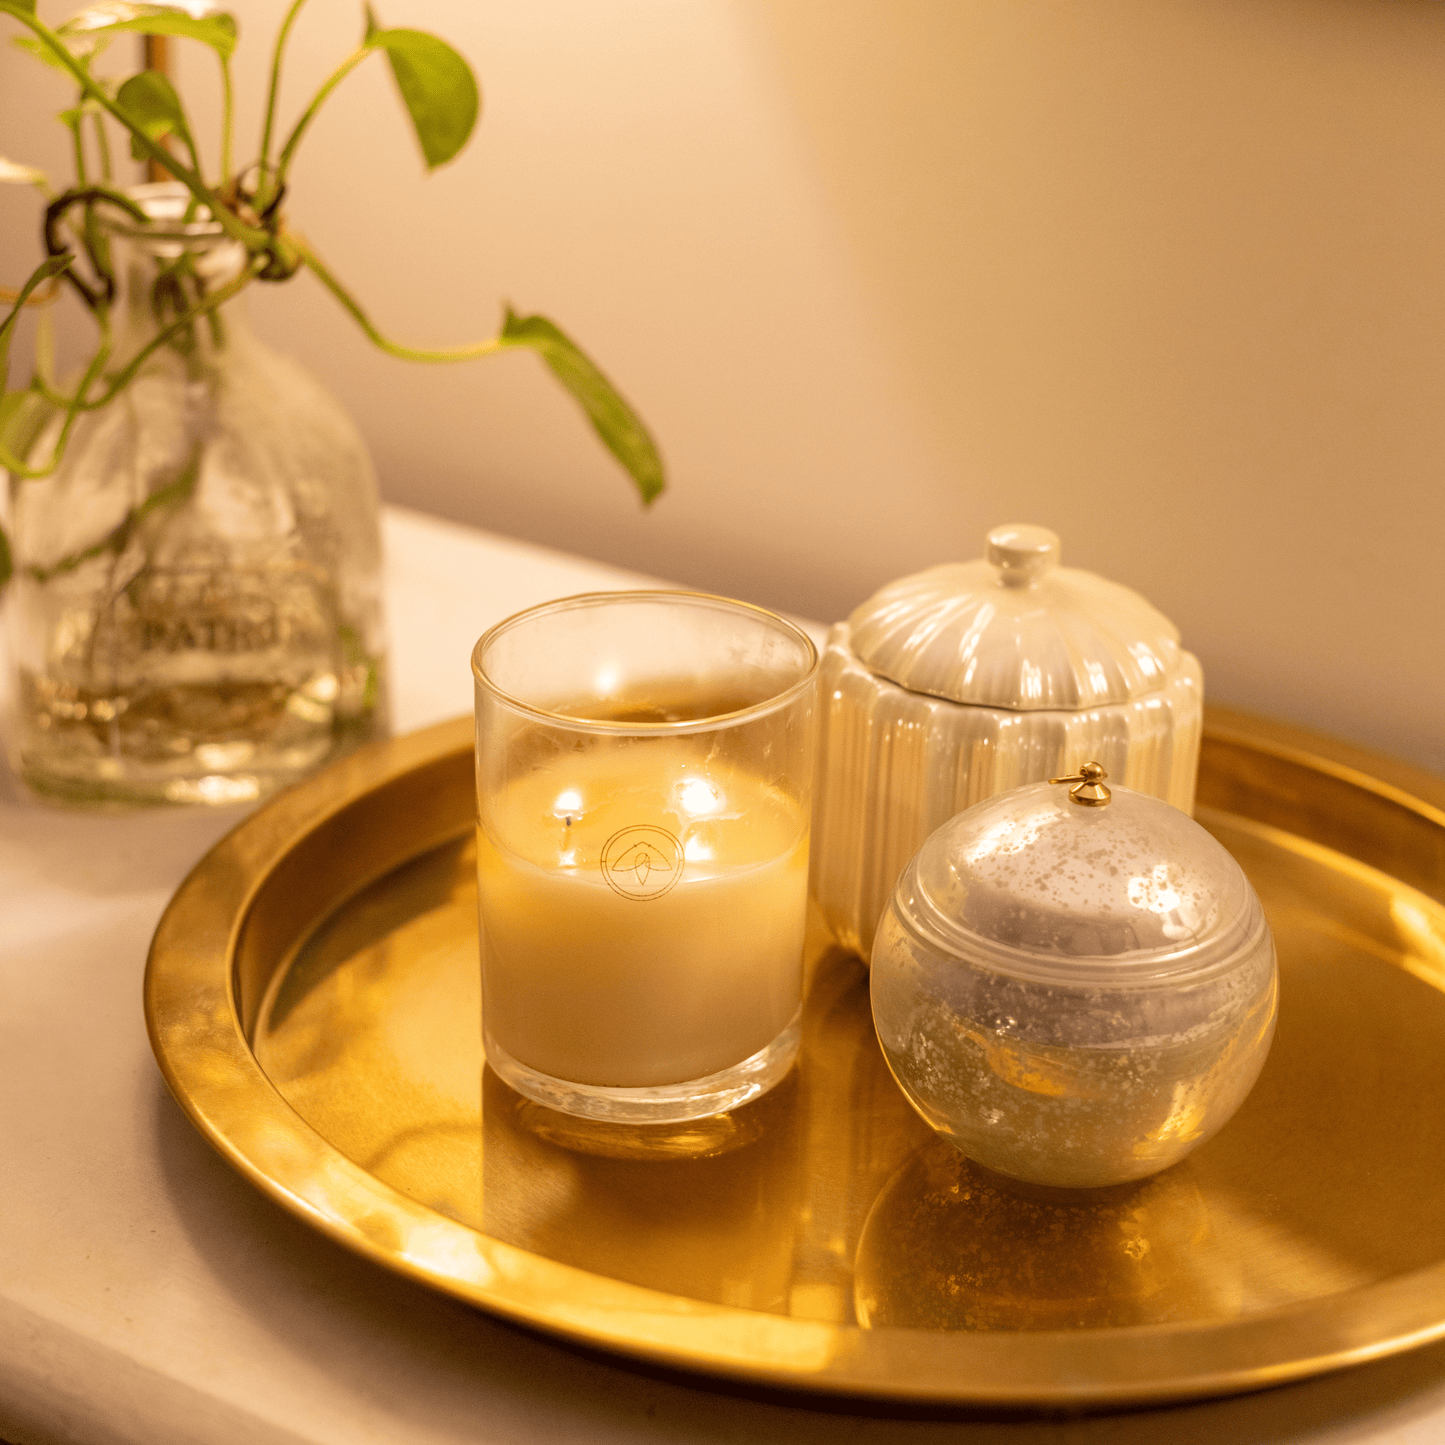 10oz clarity two wick candle on gold metal tray with home decor and planter in background